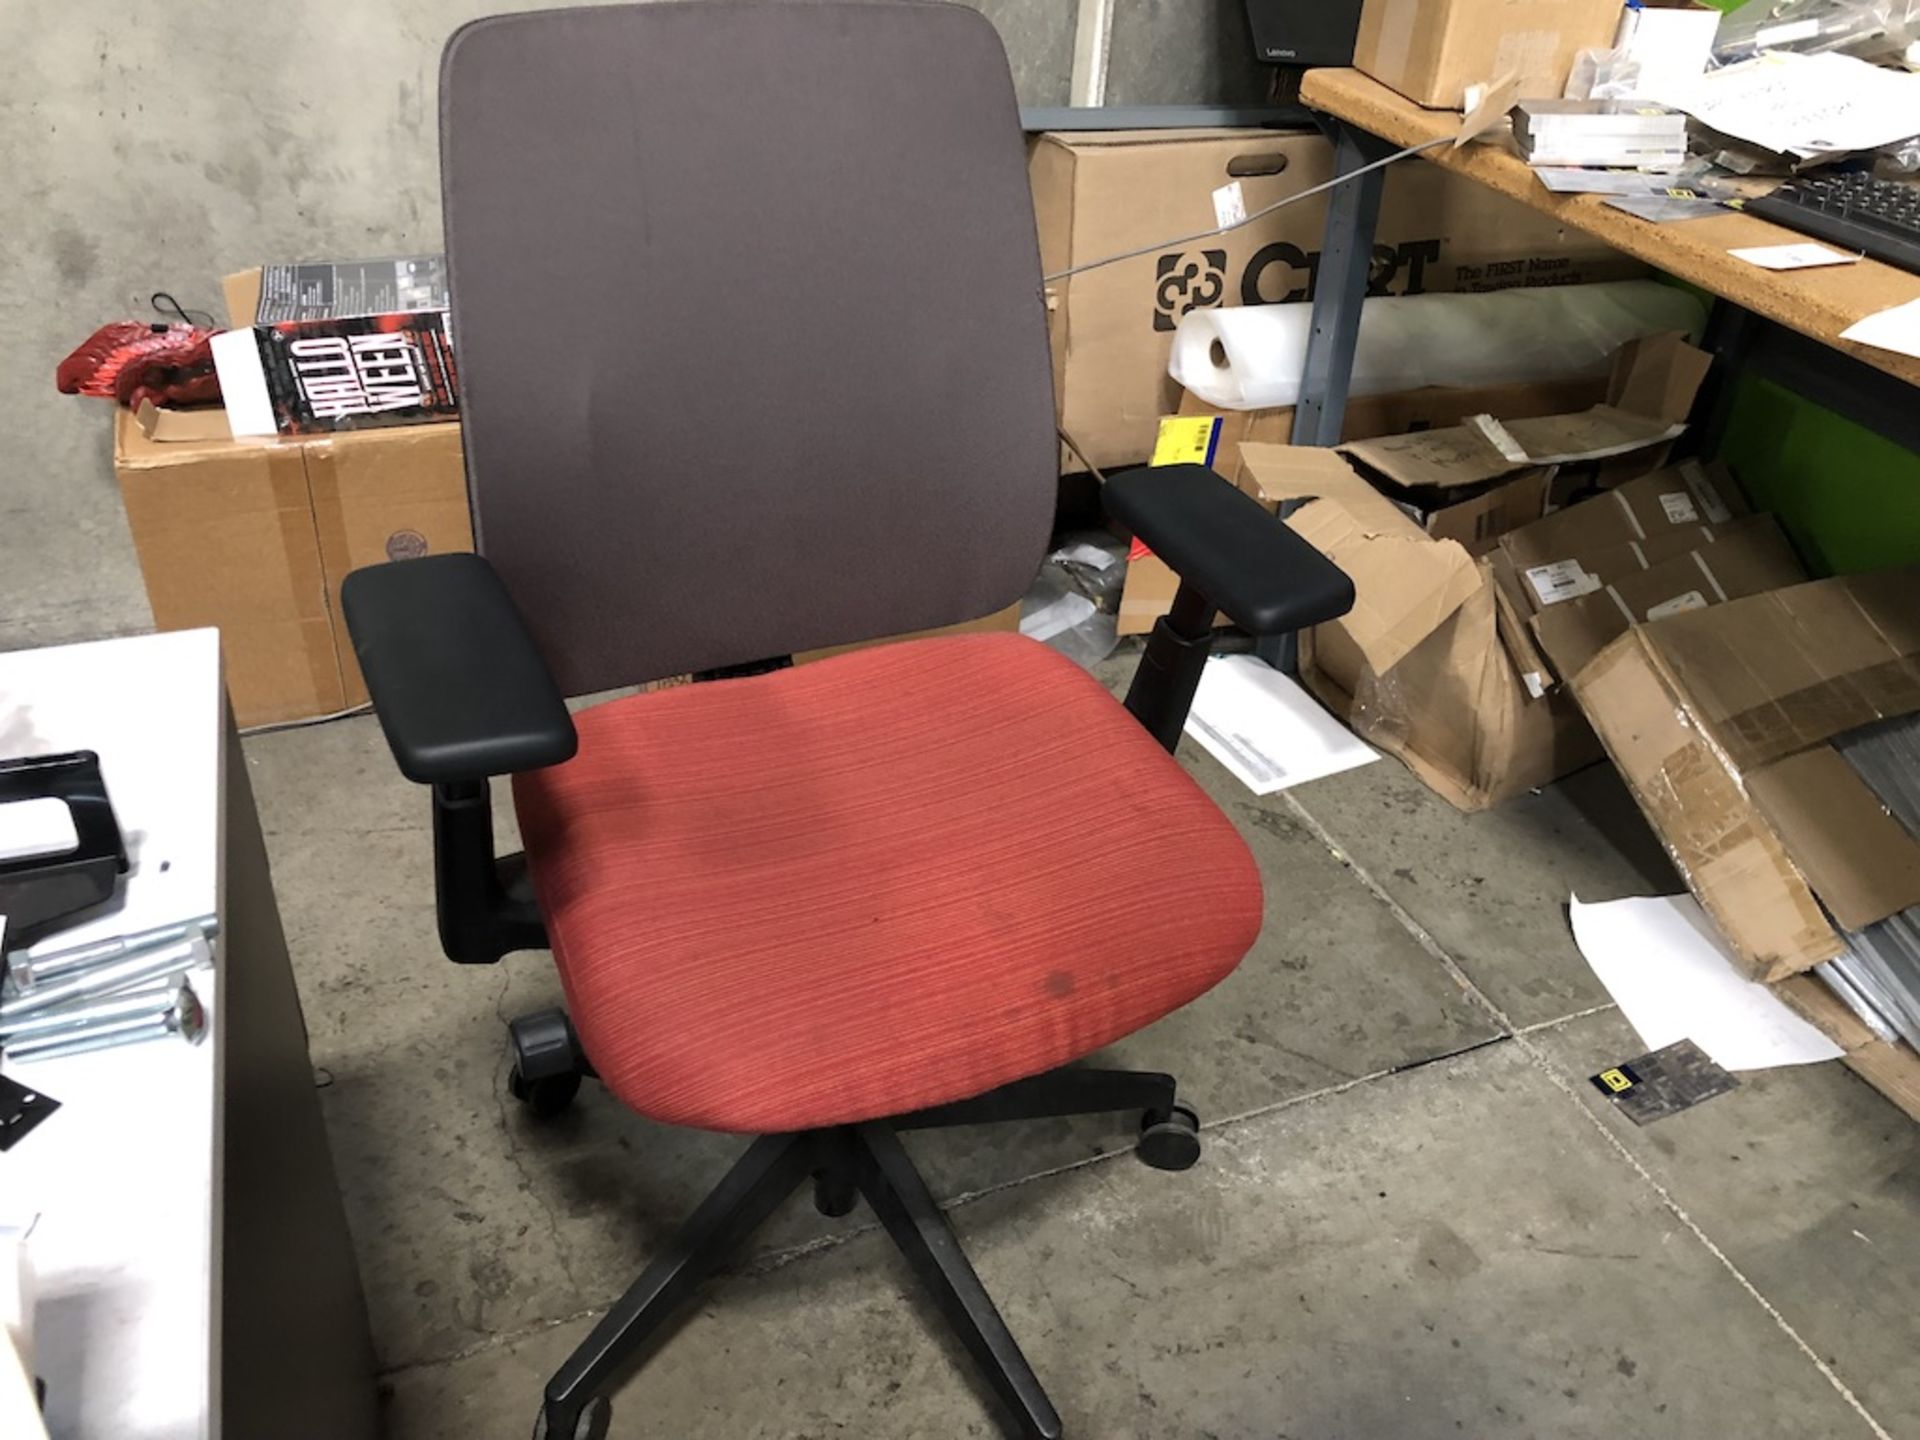 5 CASTER ORANGE CUSHION PADDED OFFICE CHAIR W/ PADDED ARM RESTS   SCHNEIDER ELECTRIC- 6611 PRESTON - Image 2 of 3